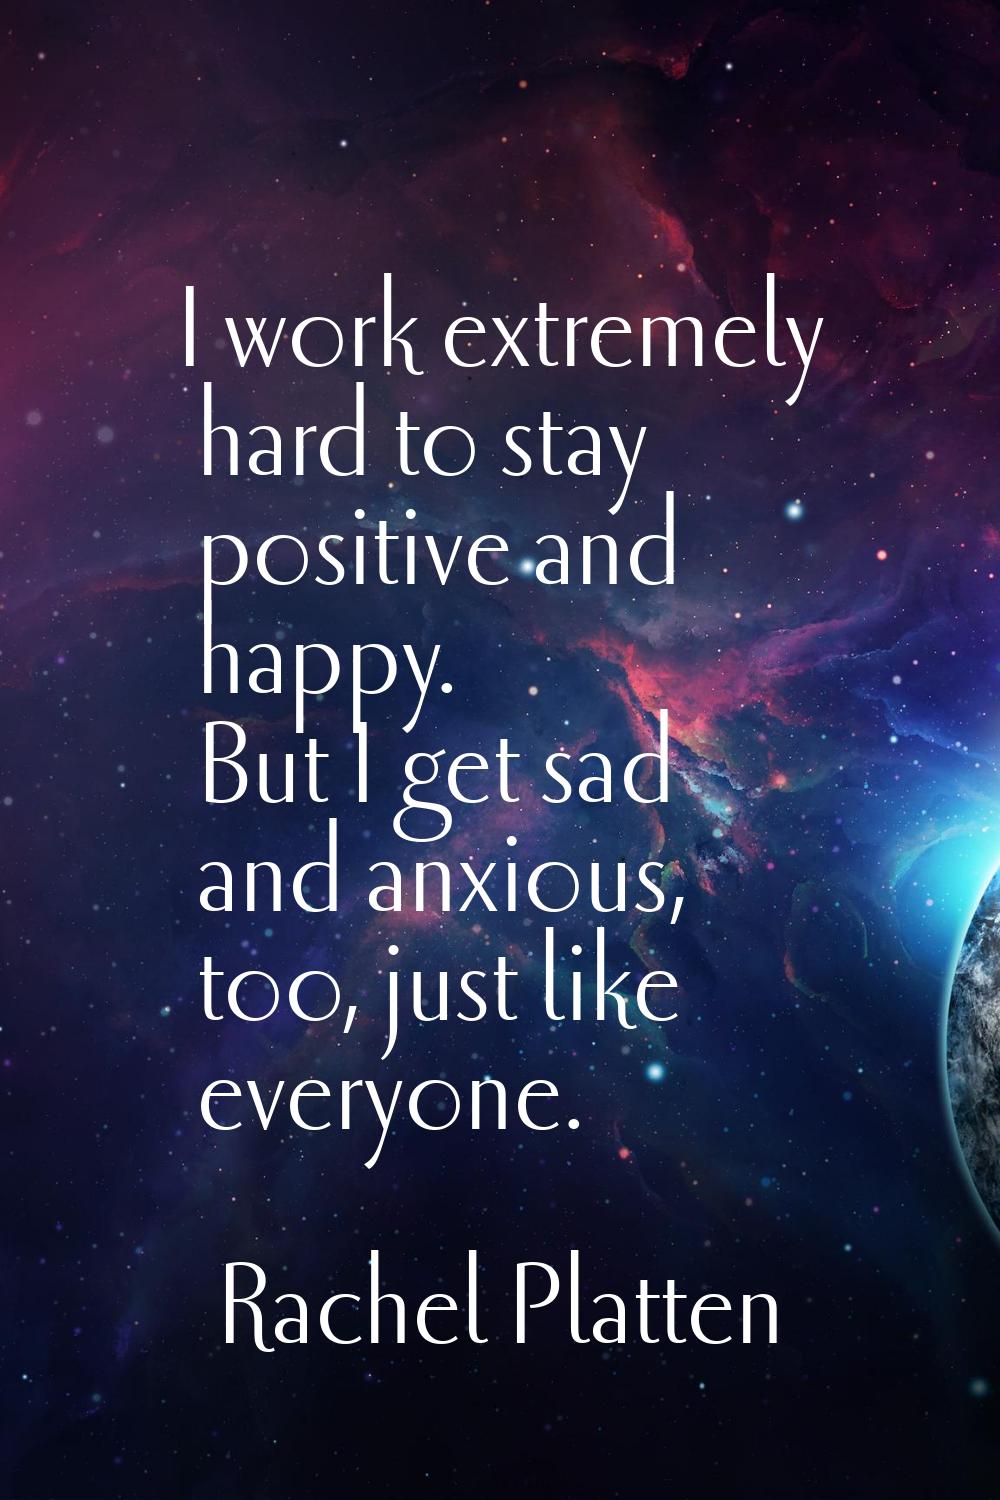 I work extremely hard to stay positive and happy. But I get sad and anxious, too, just like everyon